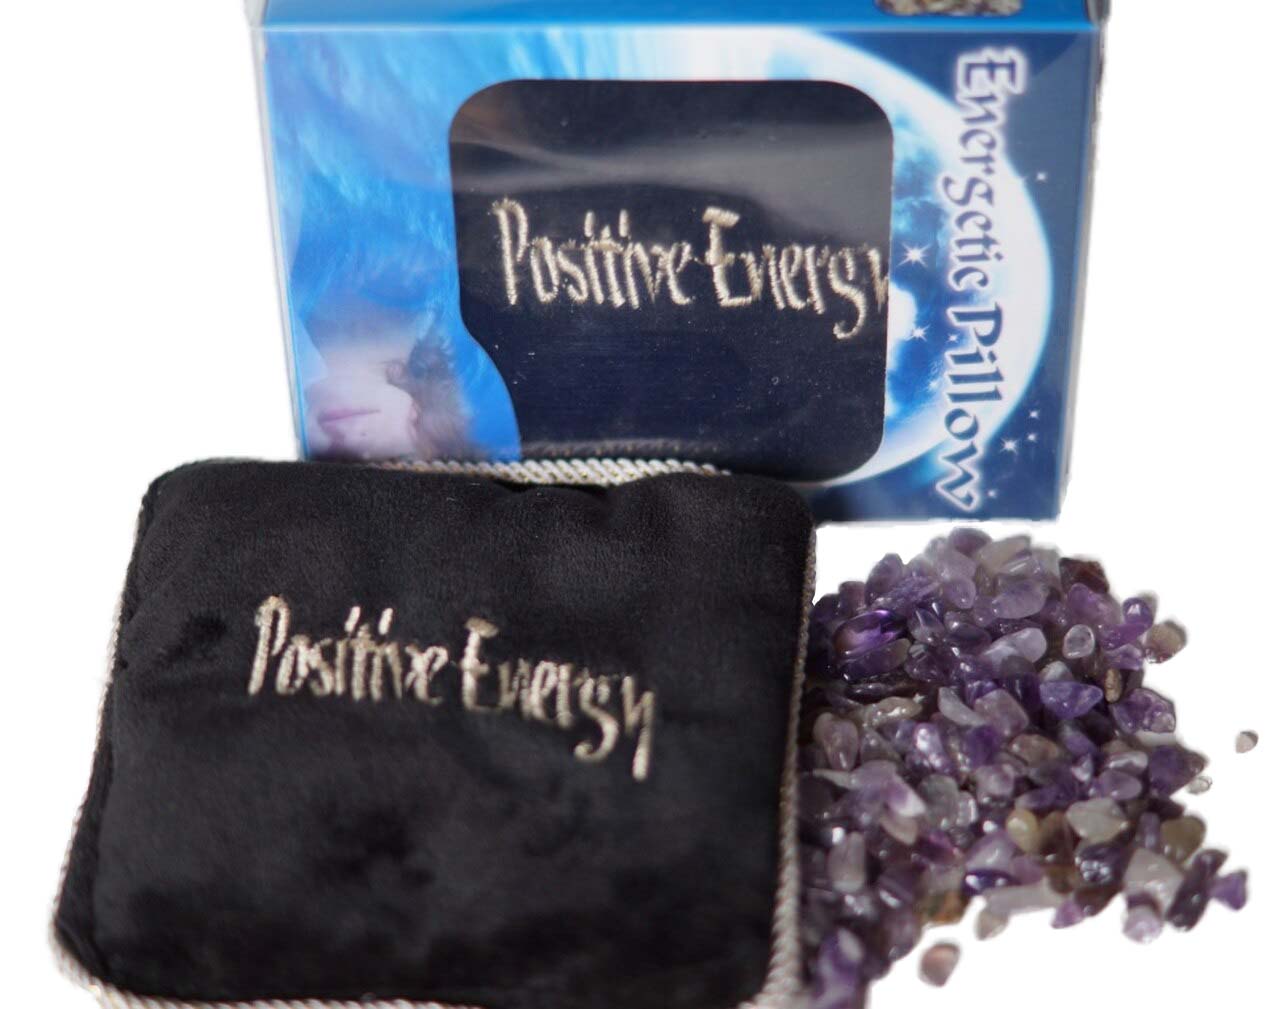 Crystals Energy Pillow